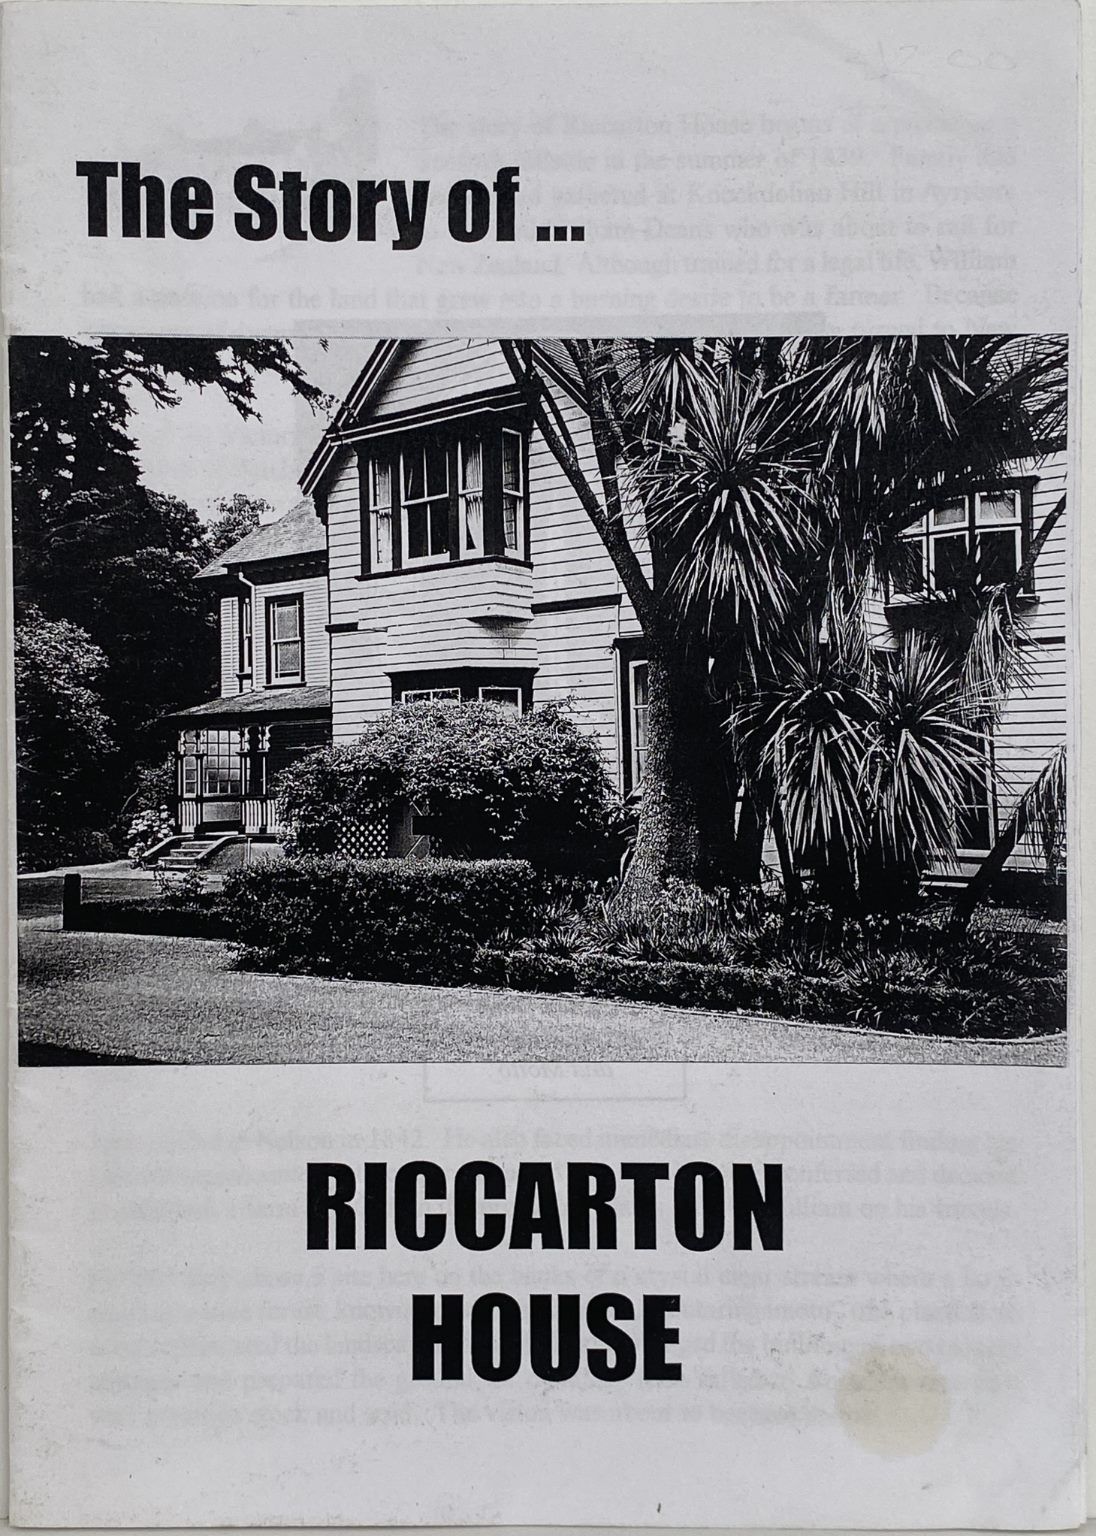 THE STORY OF RICCARTON HOUSE